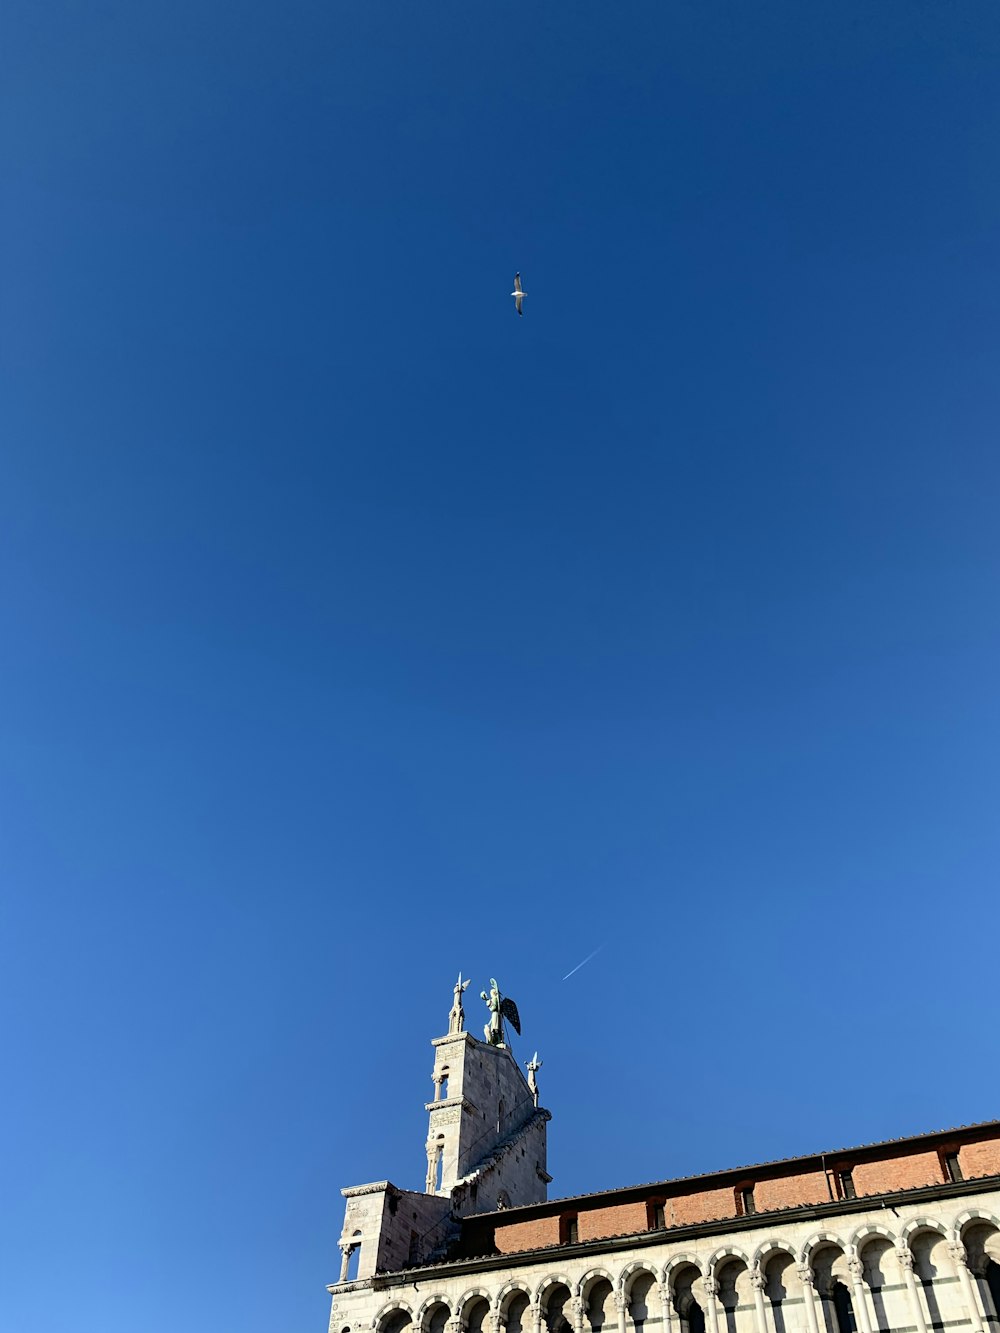 a plane flying over a building with a clock tower